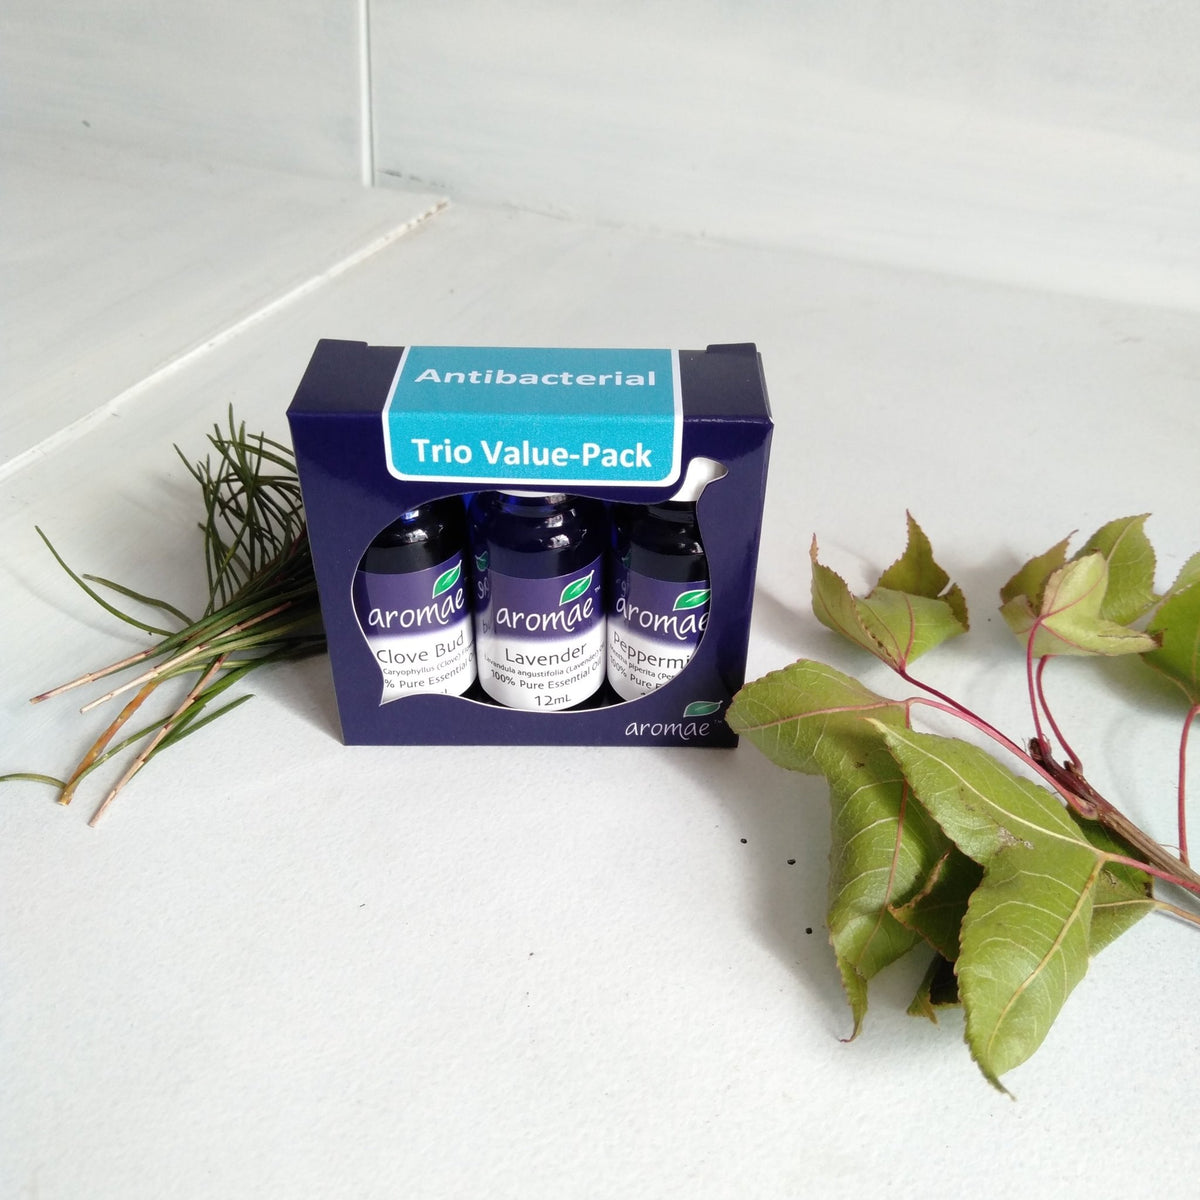 AromaeAromae's Antibacterial Trio pack #same day gift delivery melbourne#